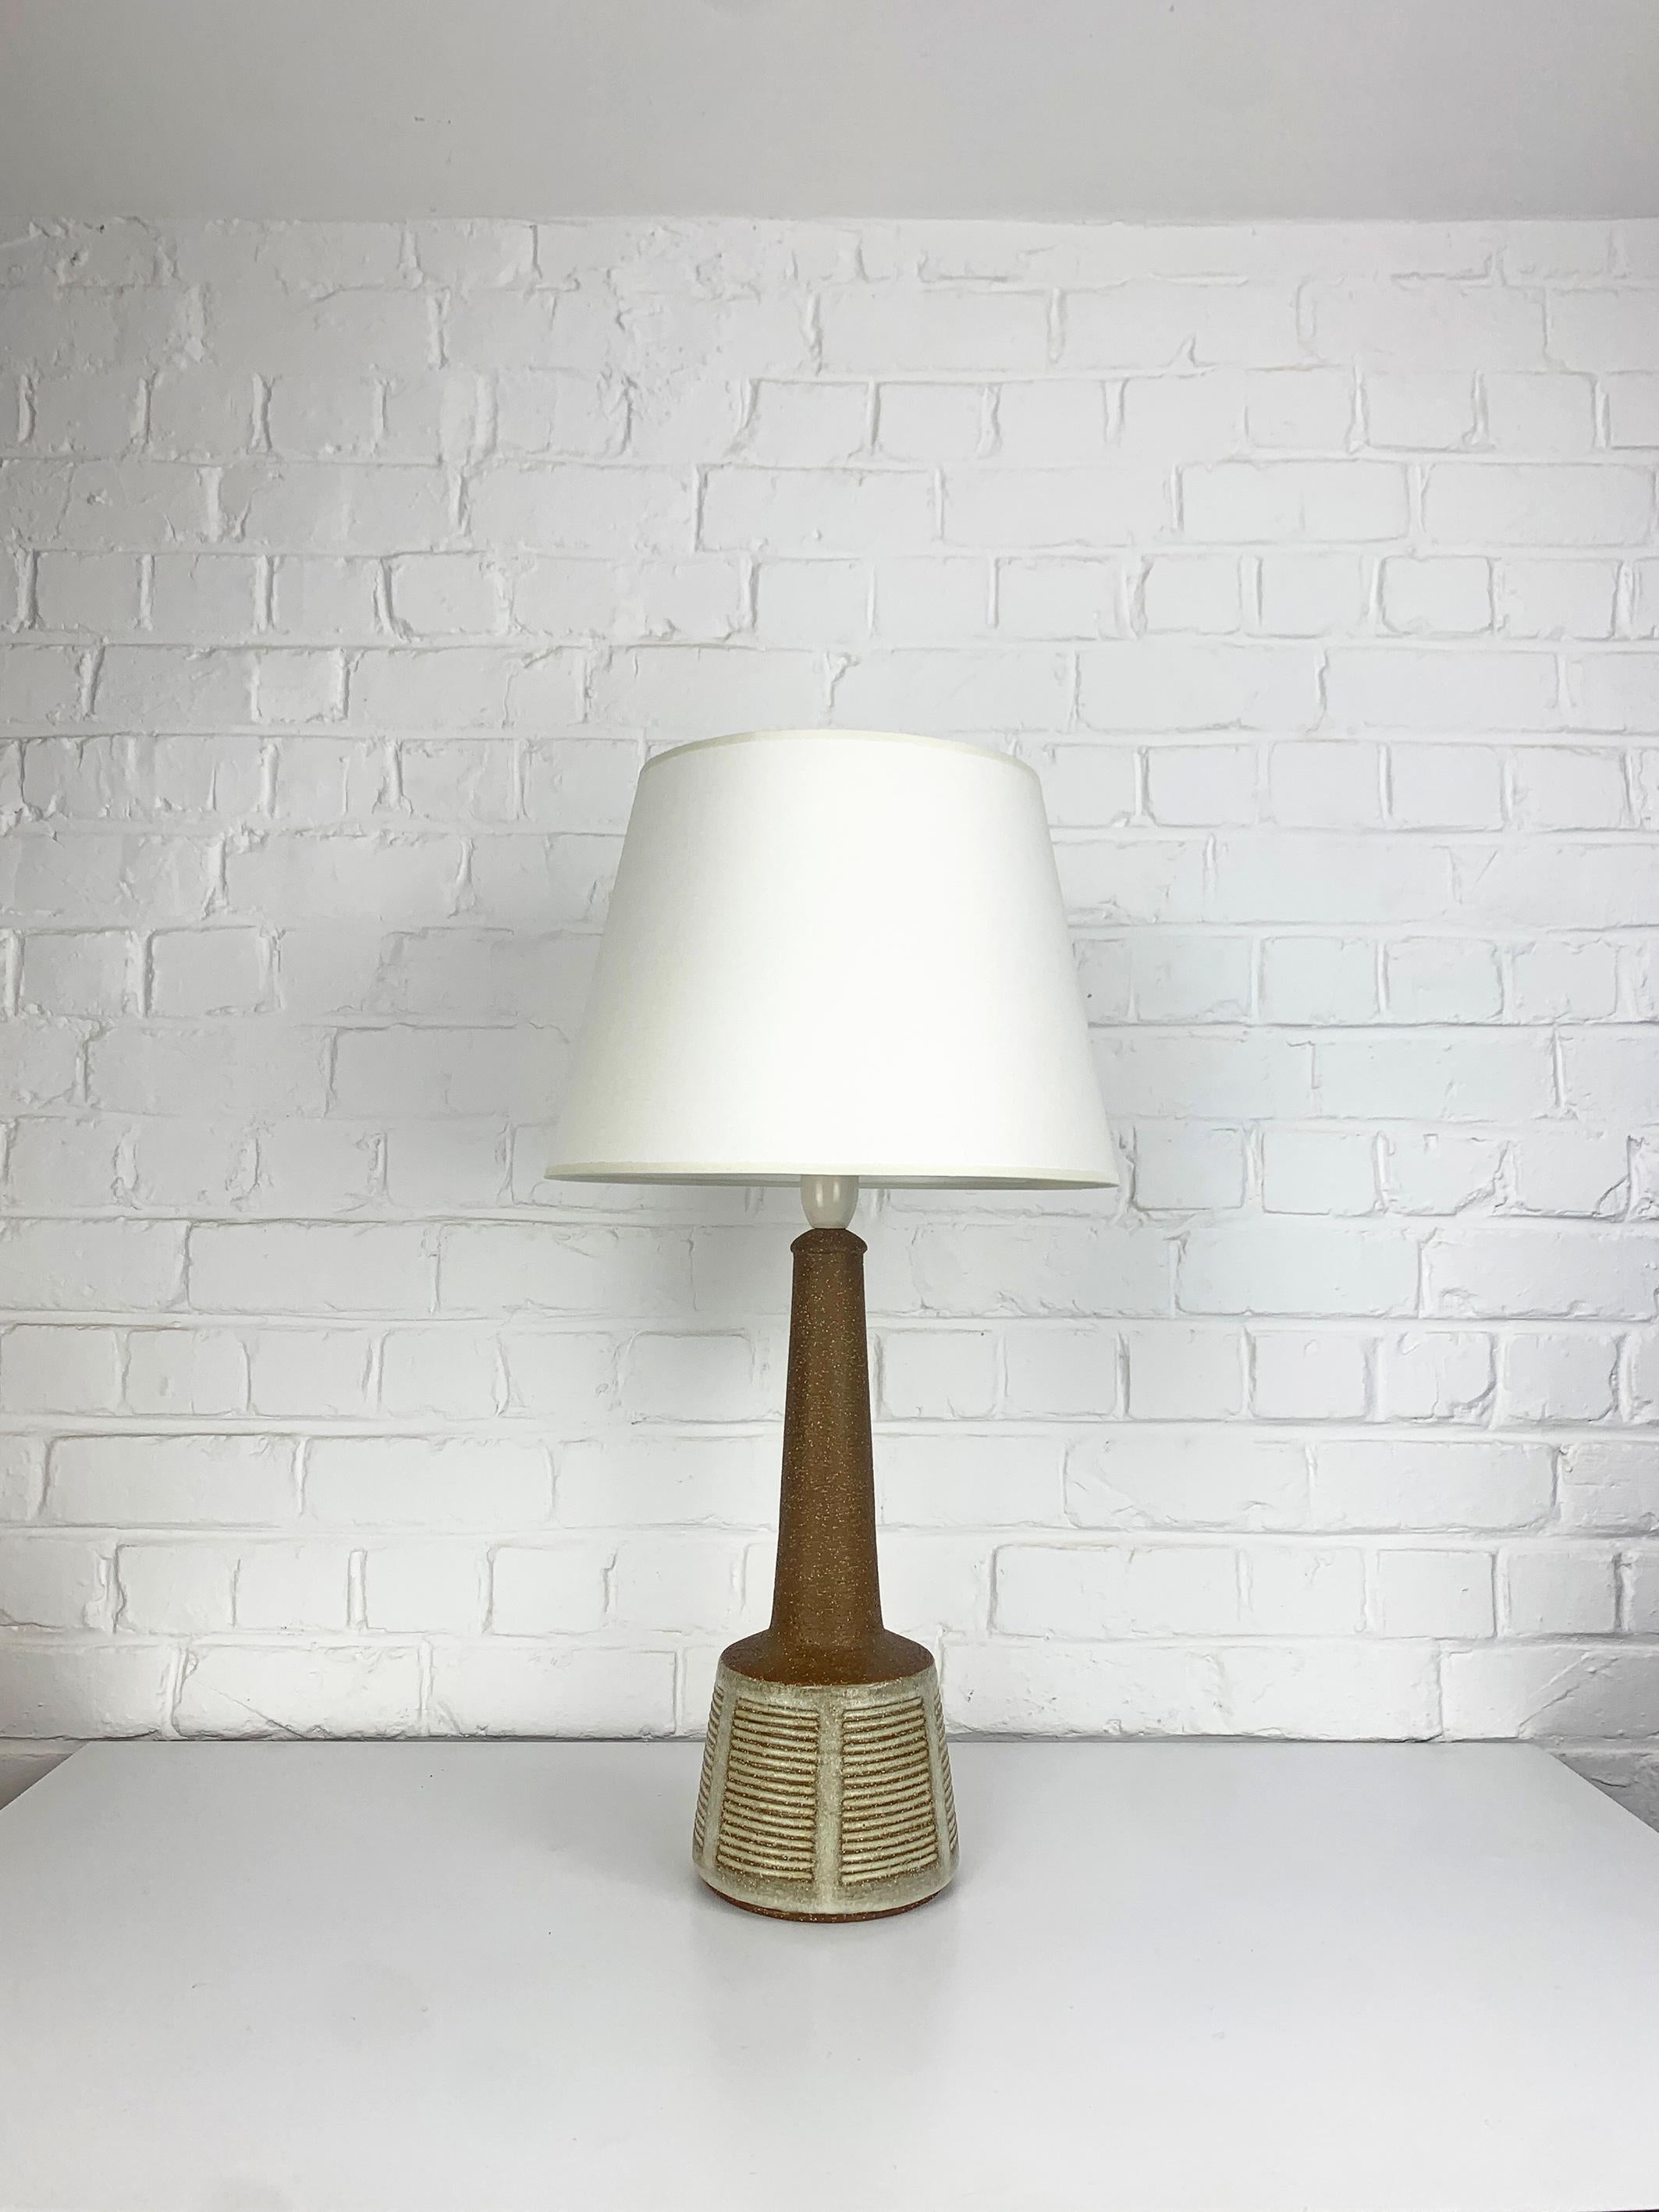 Table lamp designed by Esben Klint, son of Kaare Klint (the famous danish furniture designer). Esben has created a timeless design with this model, it has a contemporary and graphic side despite being over 50 years old.

It has been produced by